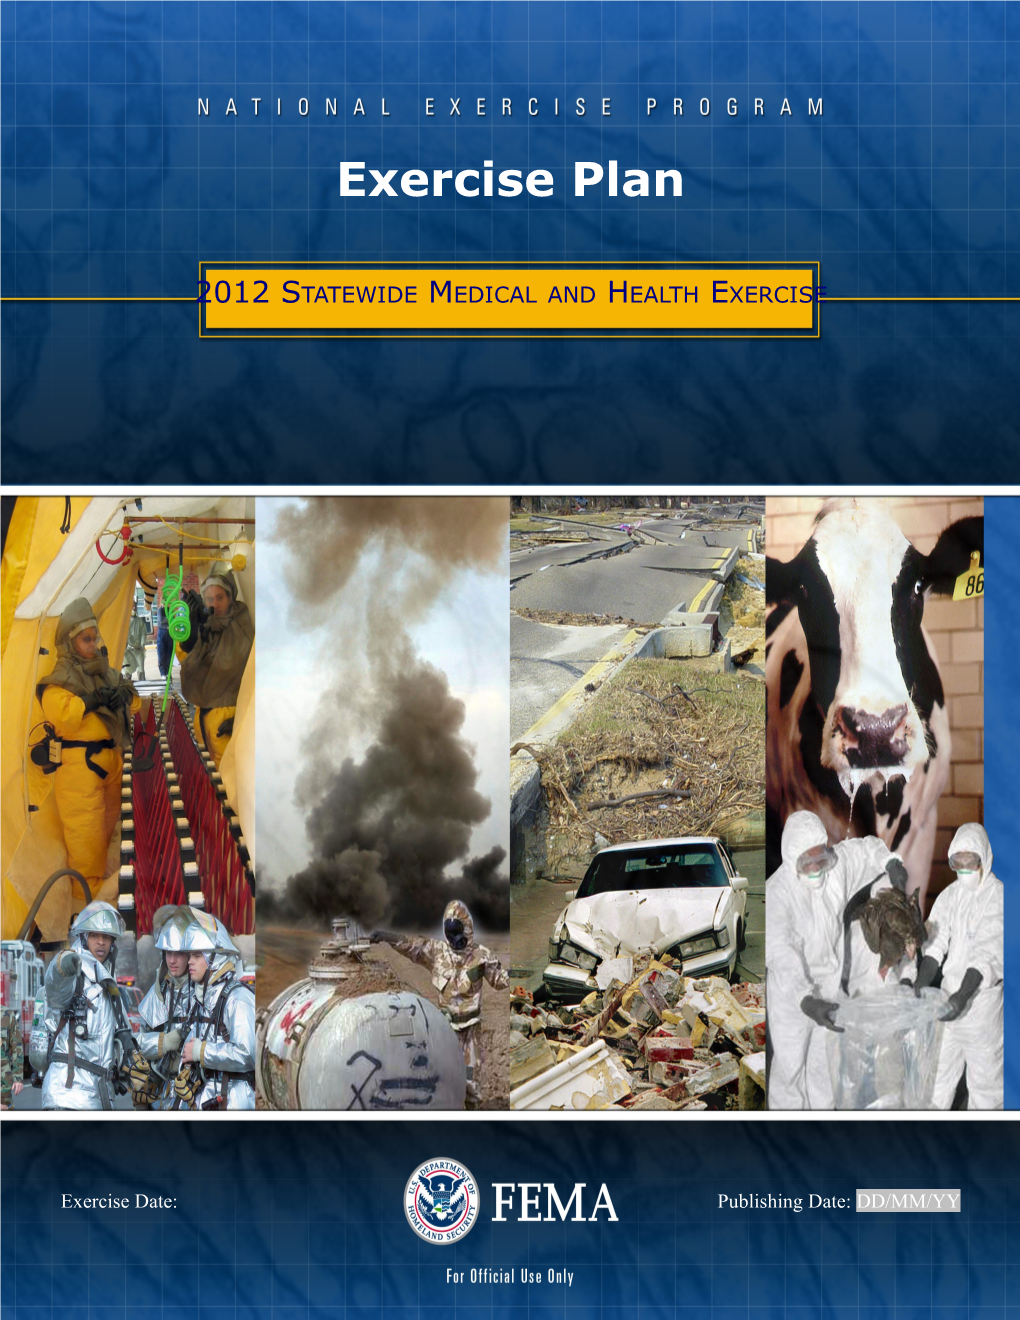 2012 Statewide Medical and Health Exercise